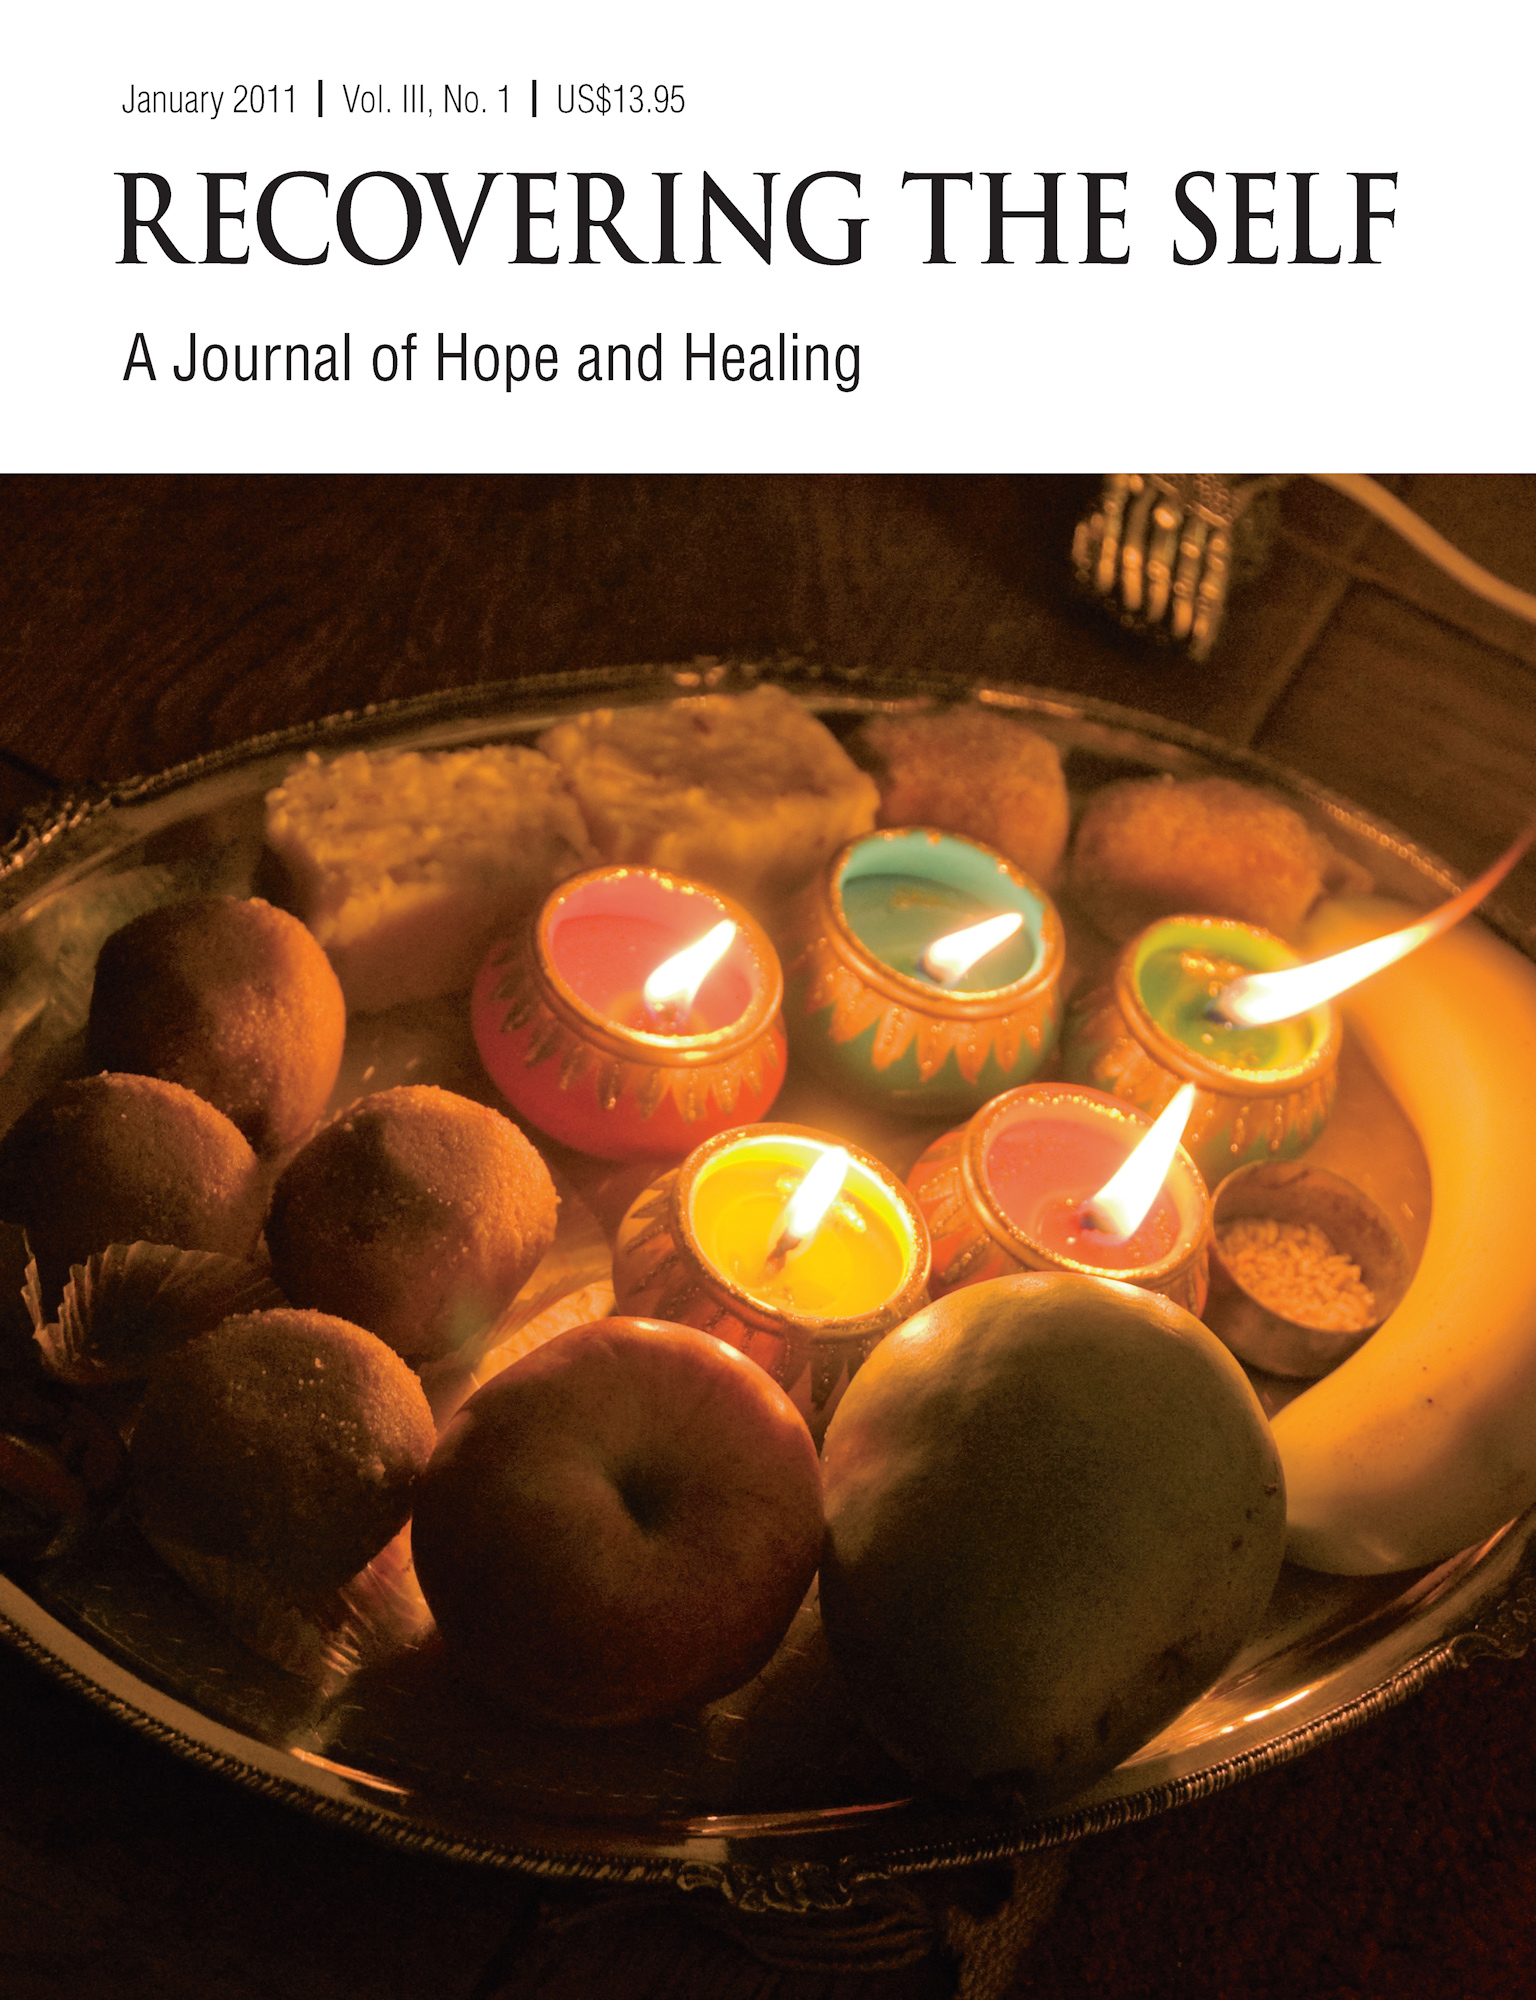 Recovering The Self: A Journal of Hope and Healing (Vol. III, No. 1)